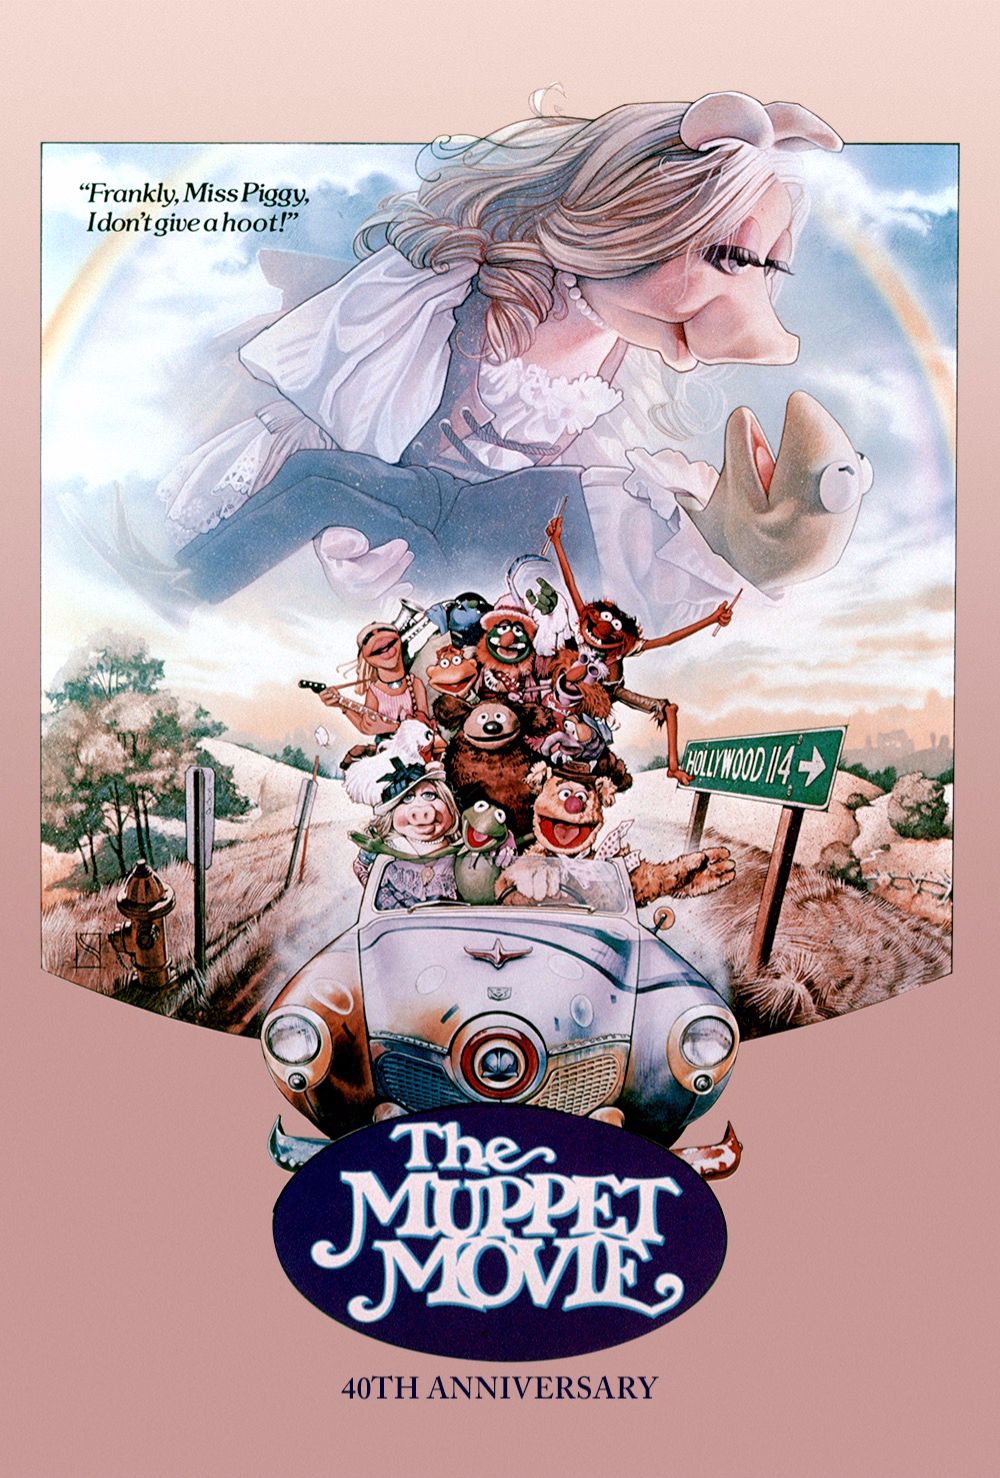 The Muppet Movie 40th Anniversary poster